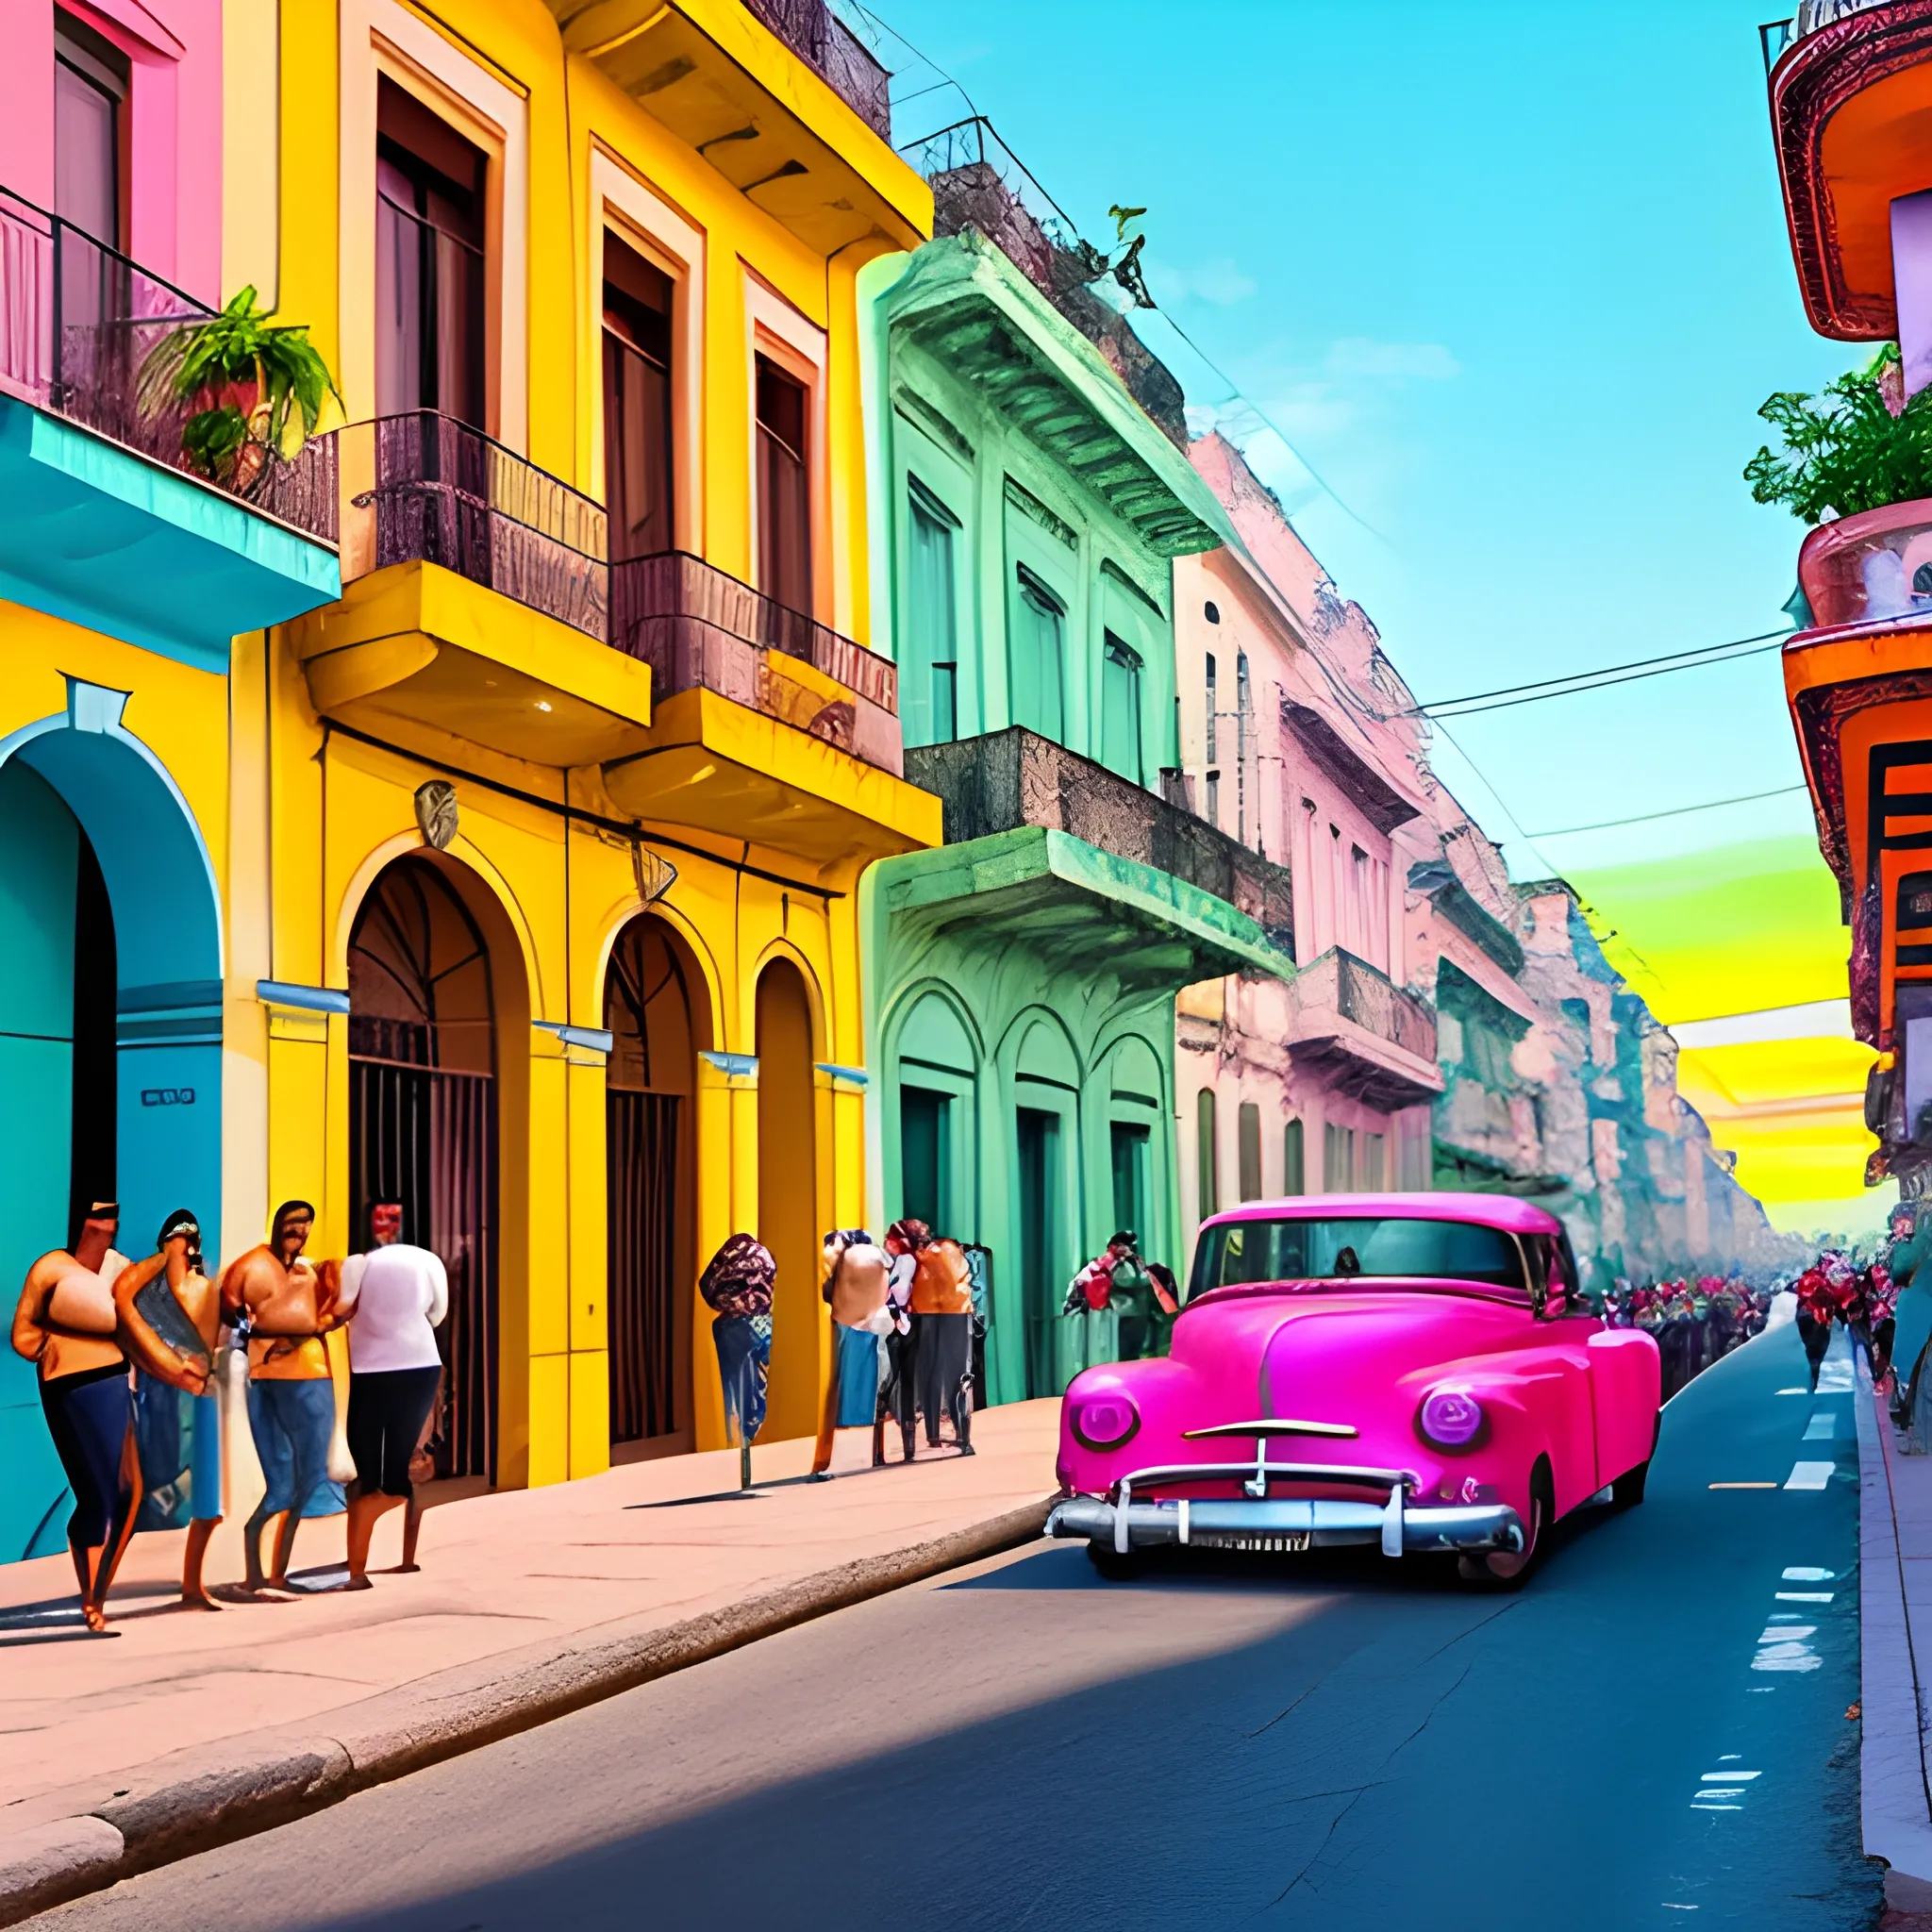 It generates a hyper-realistic image of a vibrant and colorful street scene in Havana, Cuba, at sunset. Visualize colonial buildings with peeling walls in bright shades of blue, yellow and pink, with wrought iron balconies adorned with potted plants. In the foreground, there should be a classic American car from the 1950s, gleaming and well-preserved, in a bright shade of mint green. The streets are full of people, enjoying the music emanating from a nearby café, where a group of musicians play Cuban son. The sky is a canvas of oranges and pinks, reflecting the last lights of day fading into the city's colorful architecture. It also includes views of tall palm trees and the blue ocean in the distance, providing the perfect counterpoint to the bustling city life.